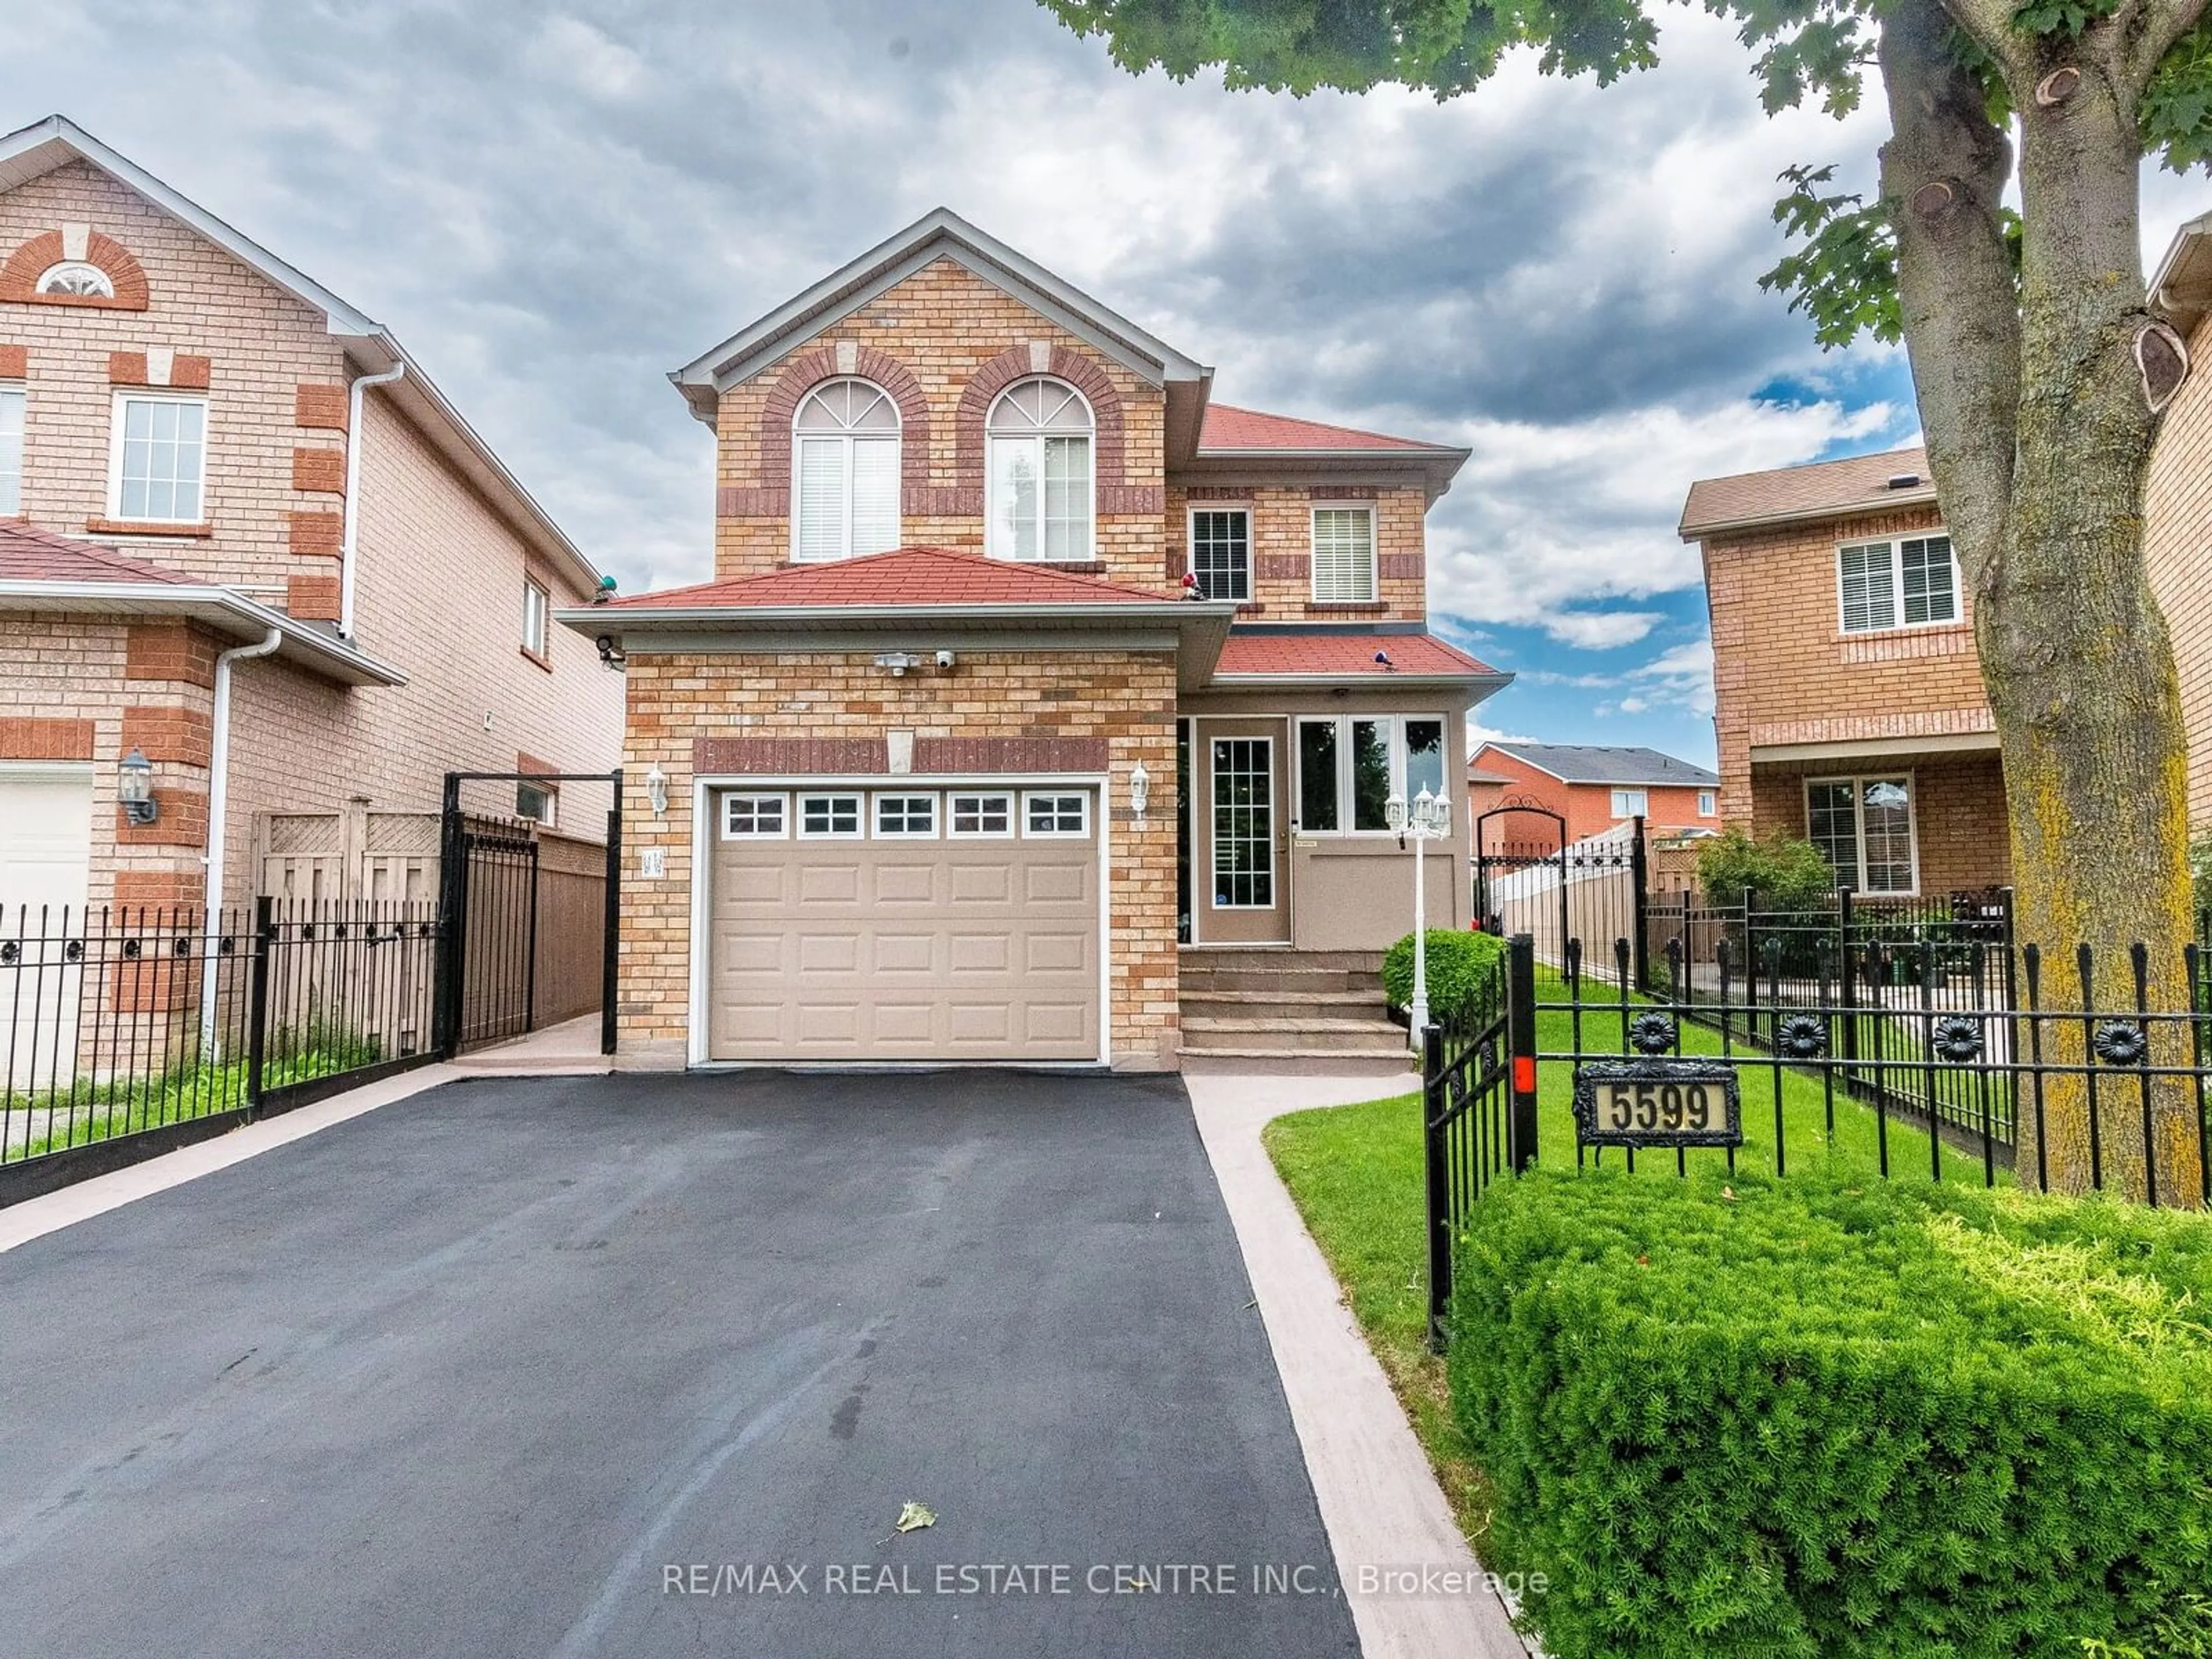 Home with brick exterior material for 5599 Brenchley Ave, Mississauga Ontario L5V 2H3